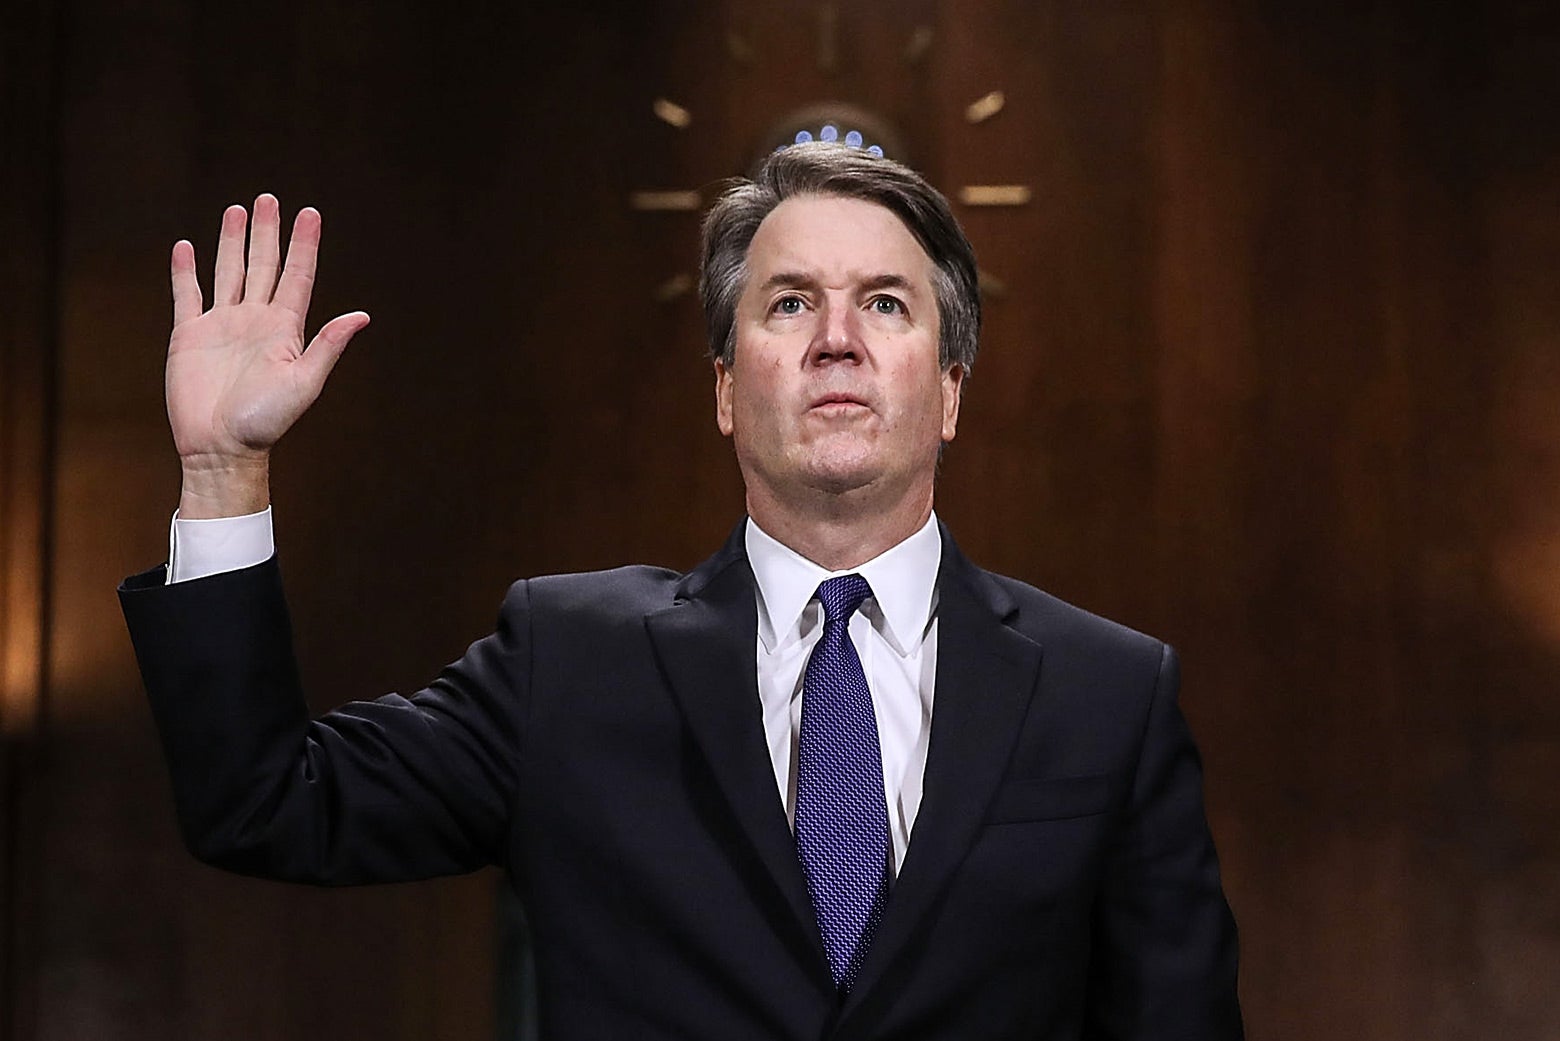 Brett Kavanaugh, wearing a dark suit and purple tie, holds up his right hand and looks forward.